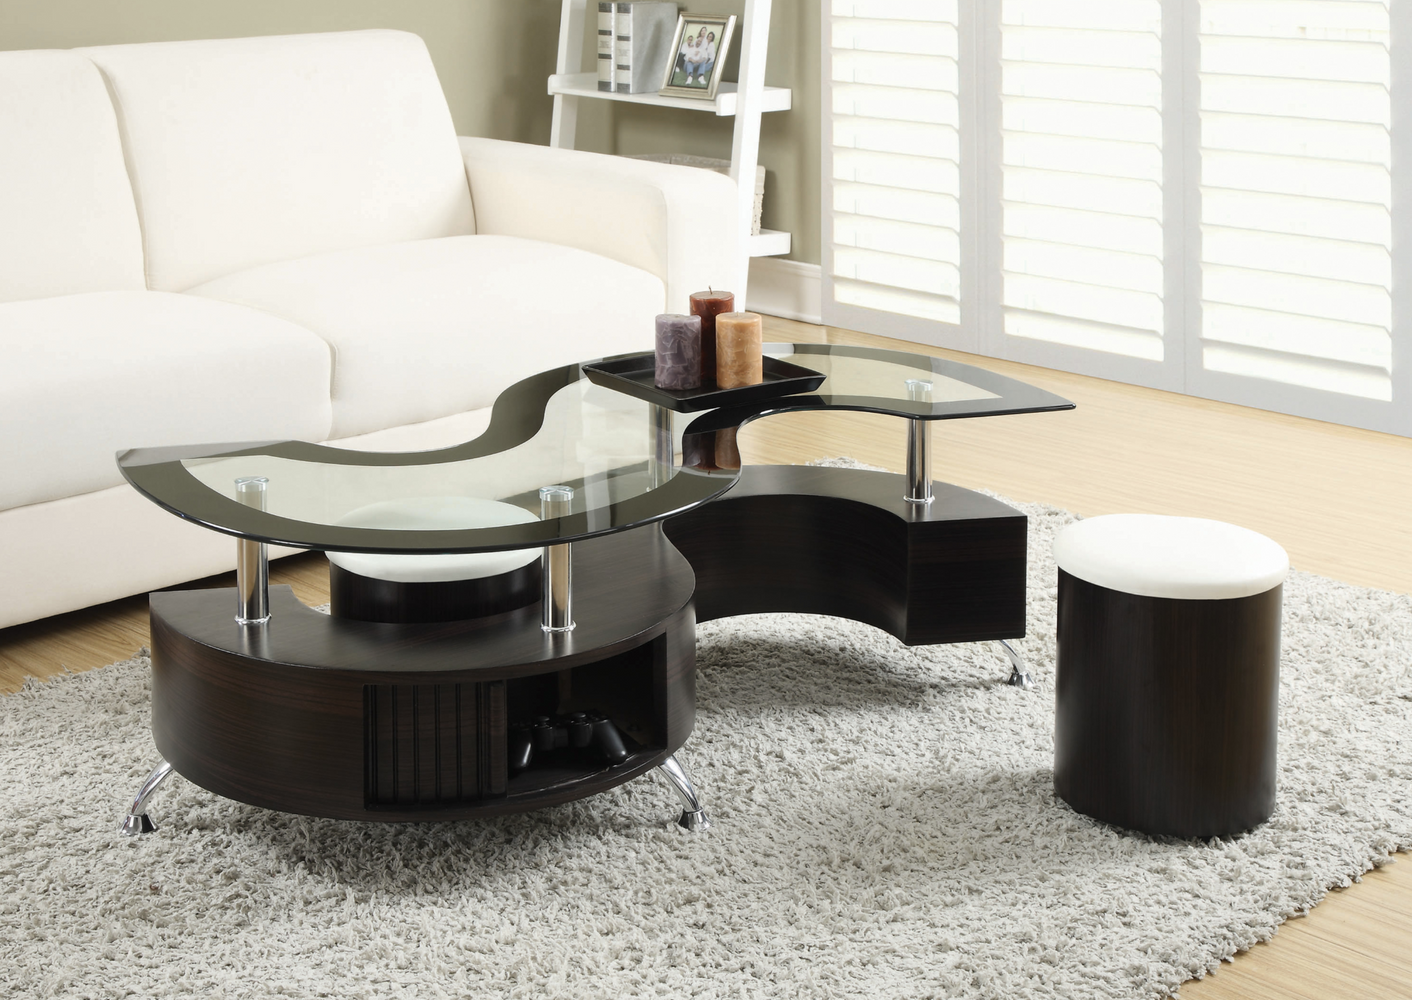 3-Piece Coffee Table And Stools Set Cappuccino